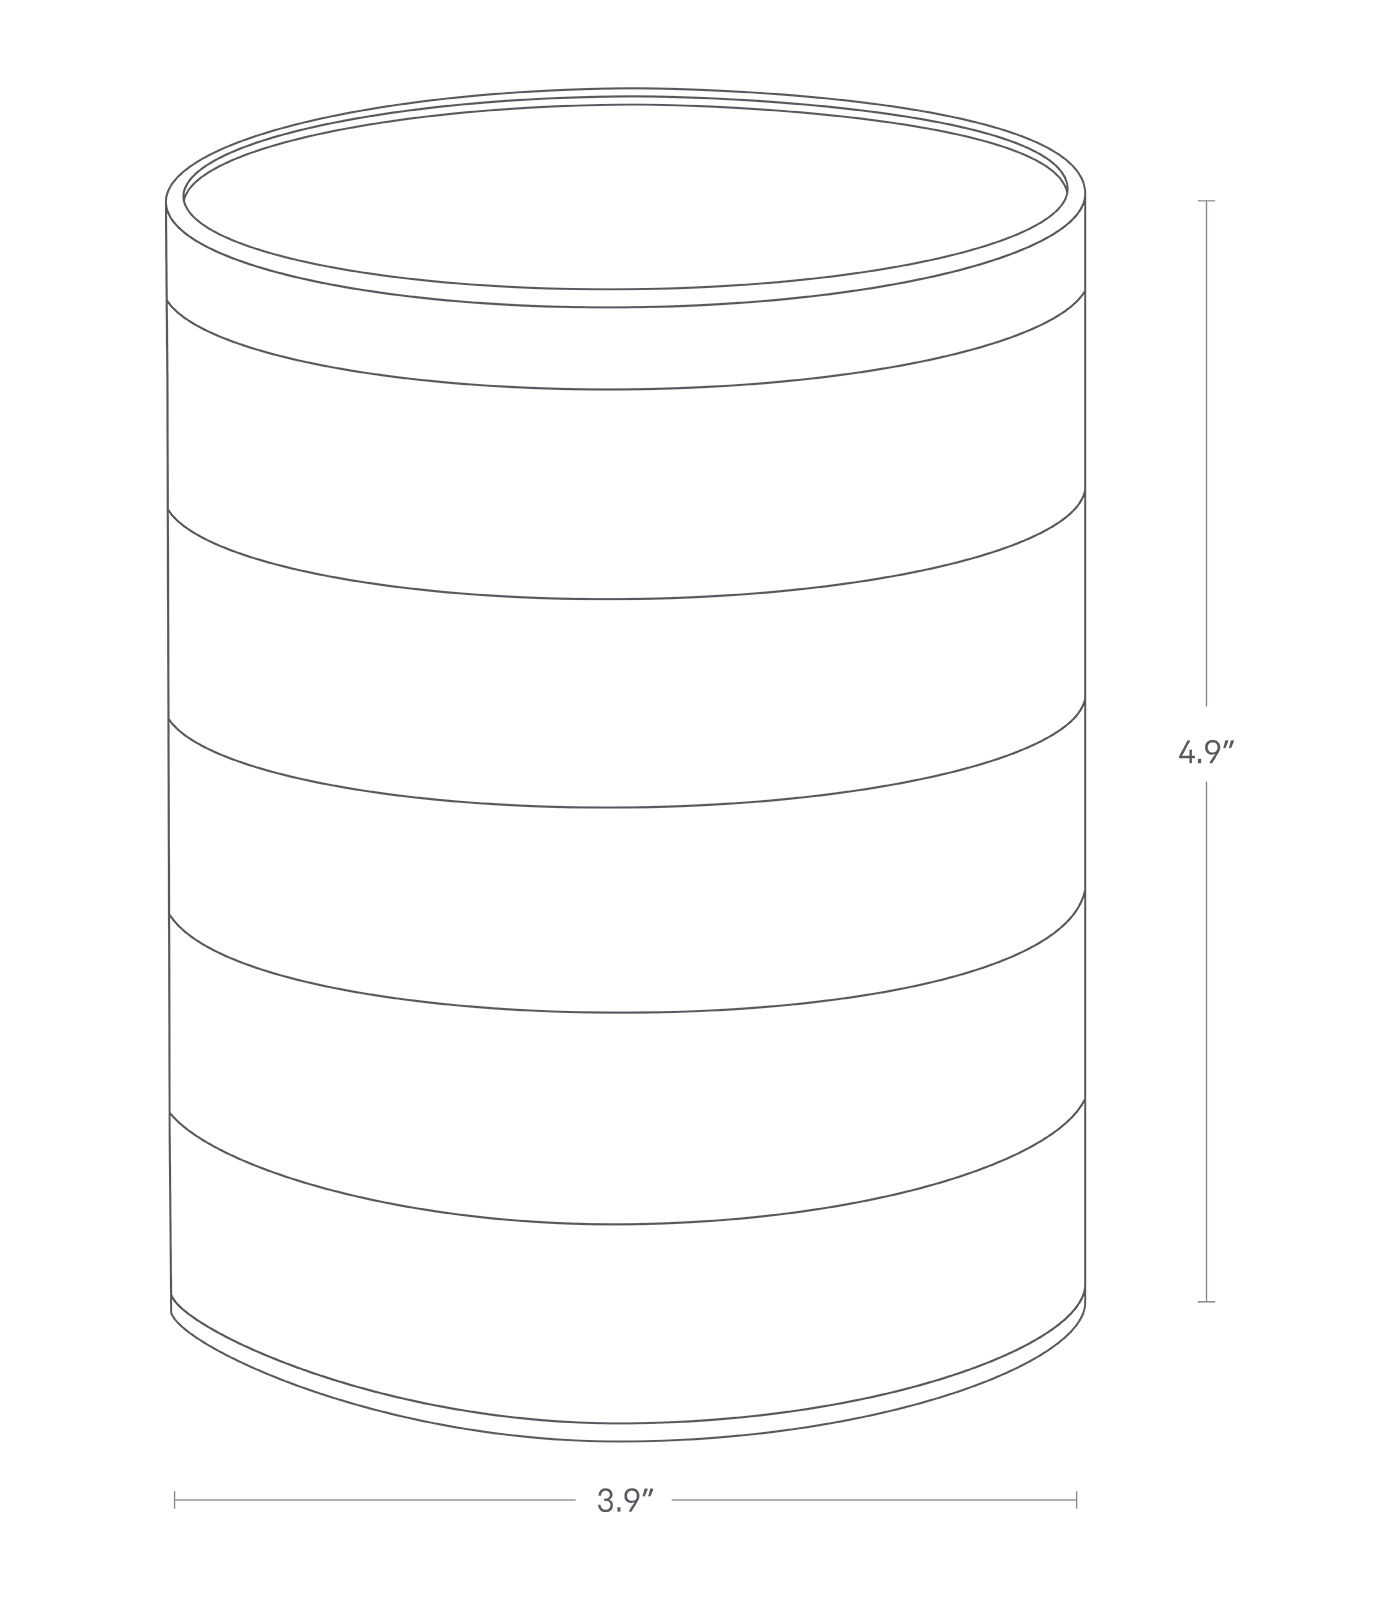 Dimension image for Stacked Jewelry Organizer showing total height of 4.9